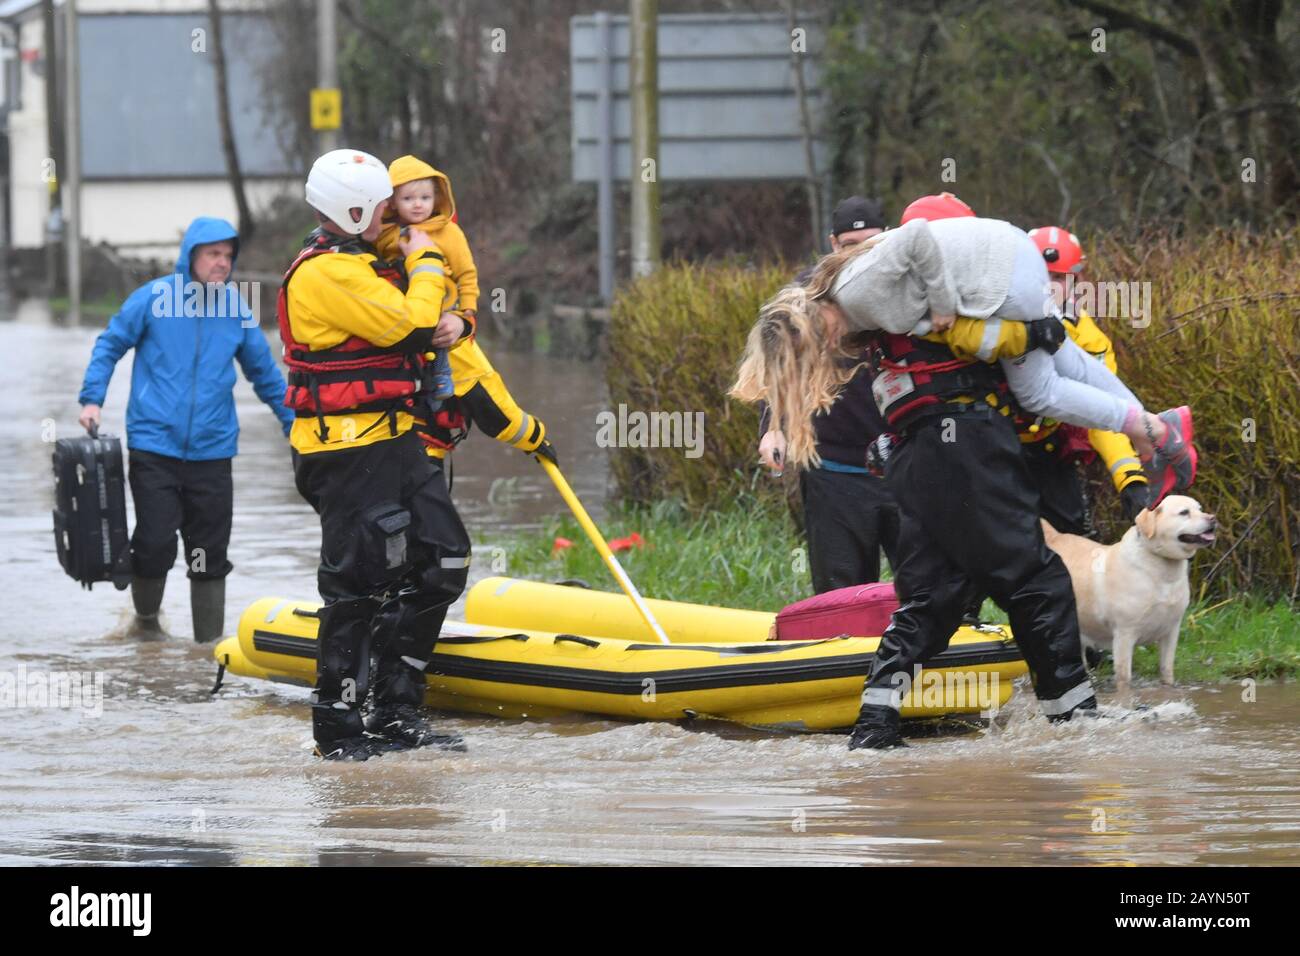 One-year-old Blake and his mum, Terri O'Donnel, are carried to safety by rescue workers as emergency services continue to take families to safety, after flooding in Nantgarw, Wales, as Storm Dennis hit the UK. Stock Photo